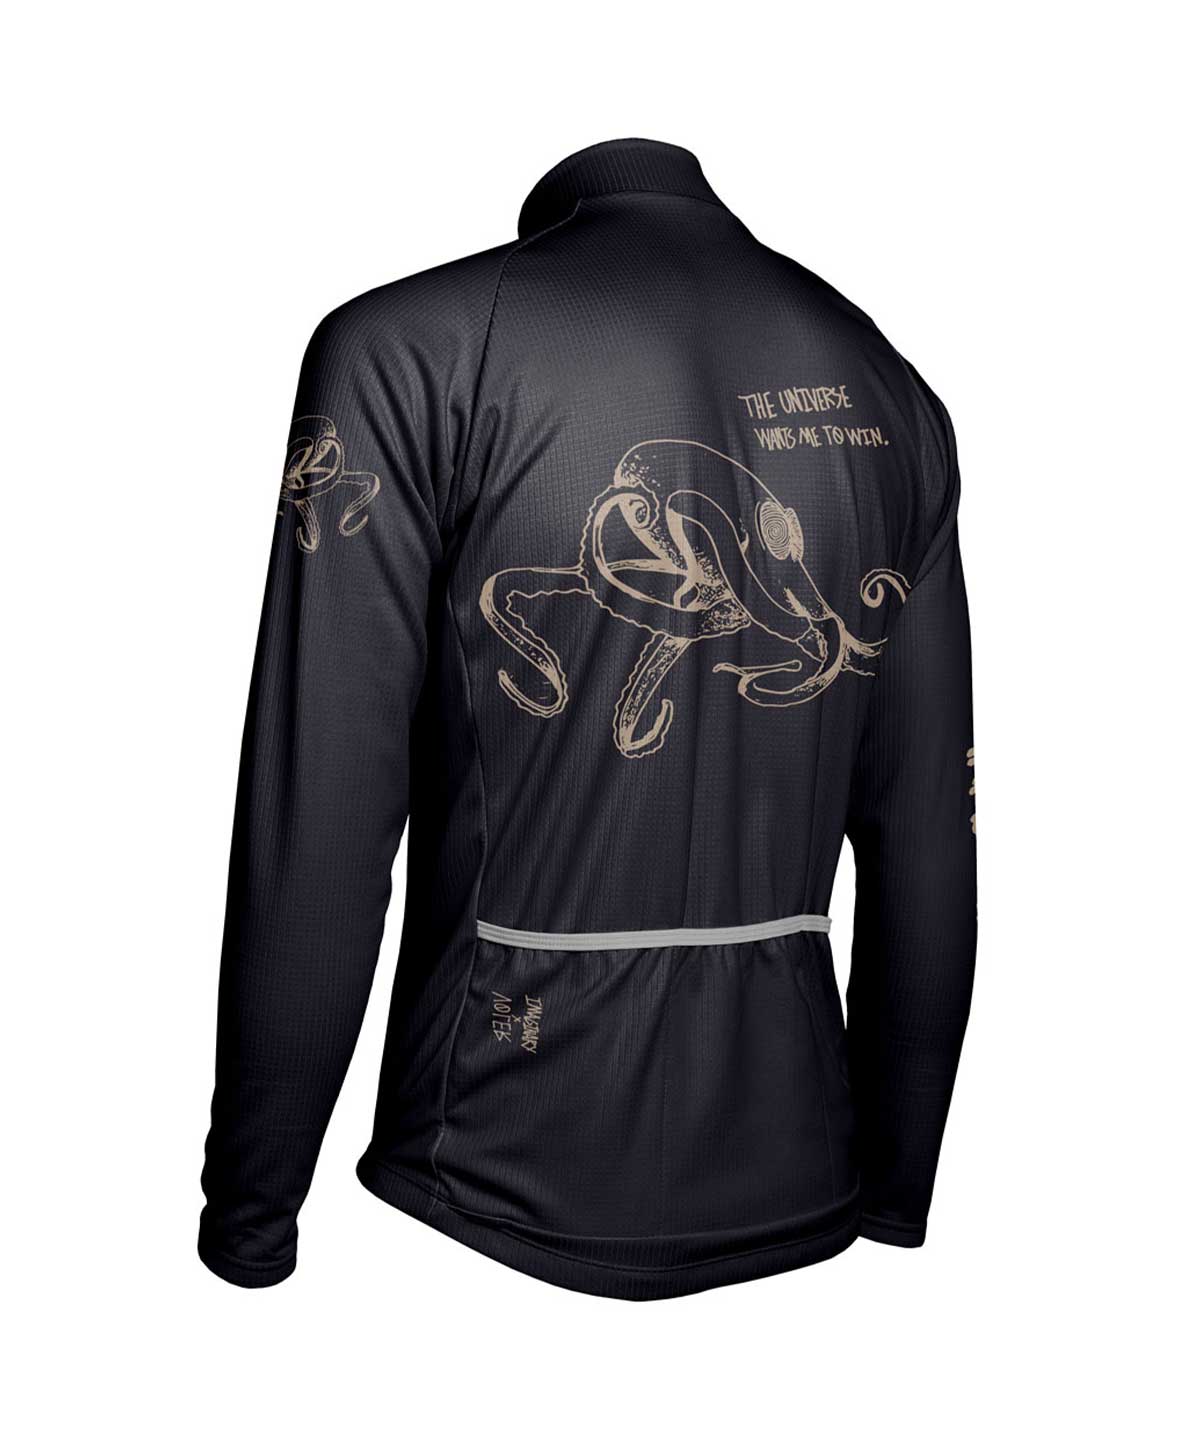 M. PELOTON THERMAL JERSEY - IMAGINARY COLLECTIVE